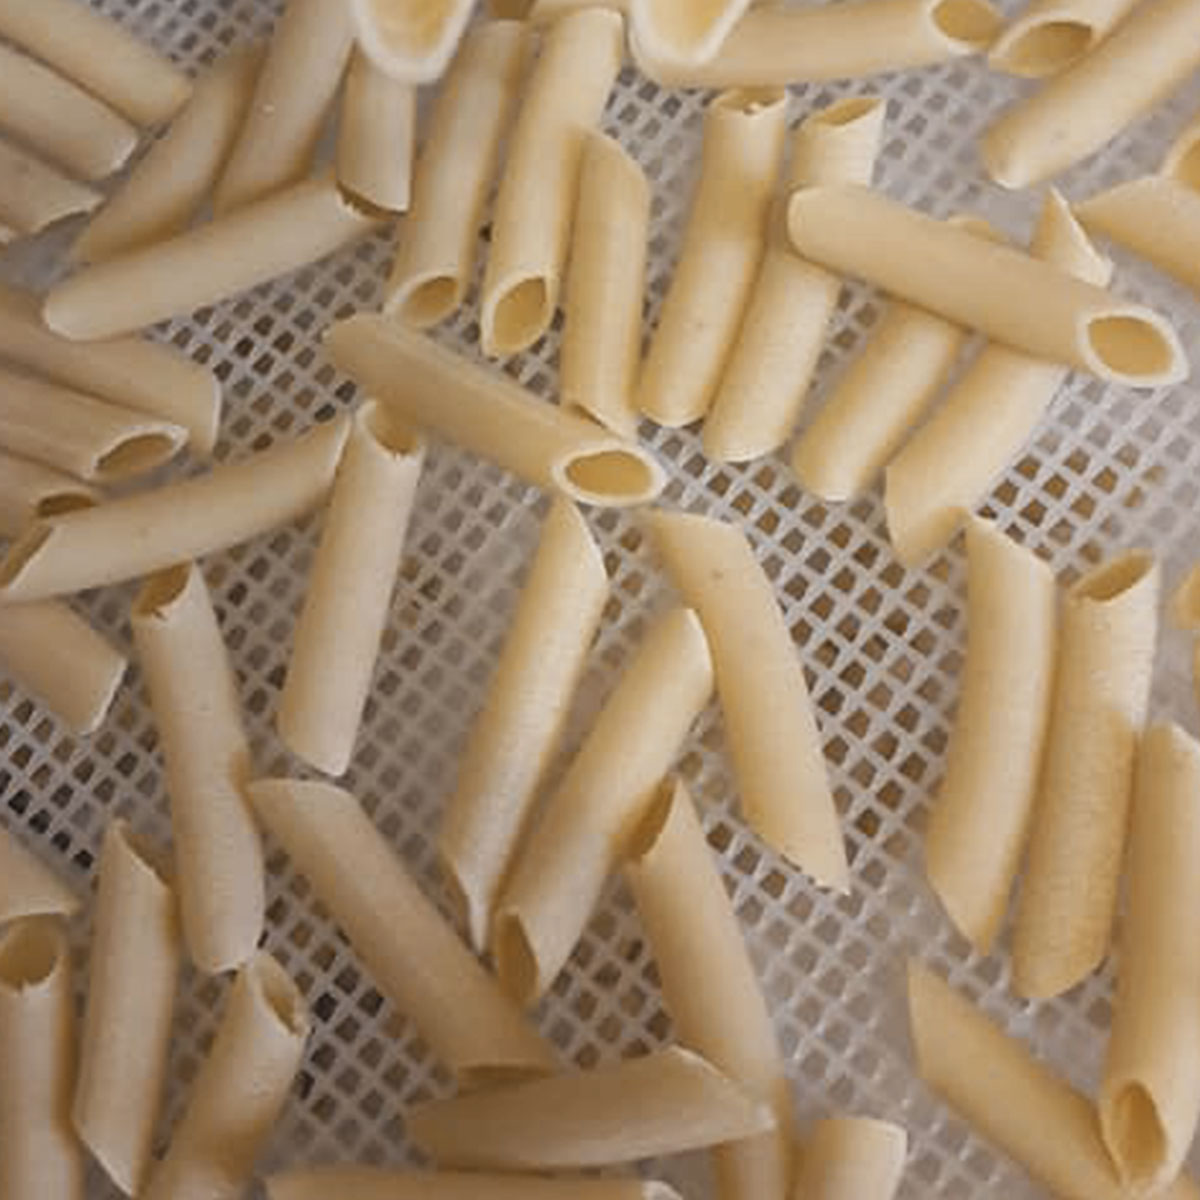 Bronze Die N° 124 PENNE LISCE - CAPO12 - Dies and Pasta 100% MADE IN ITALY